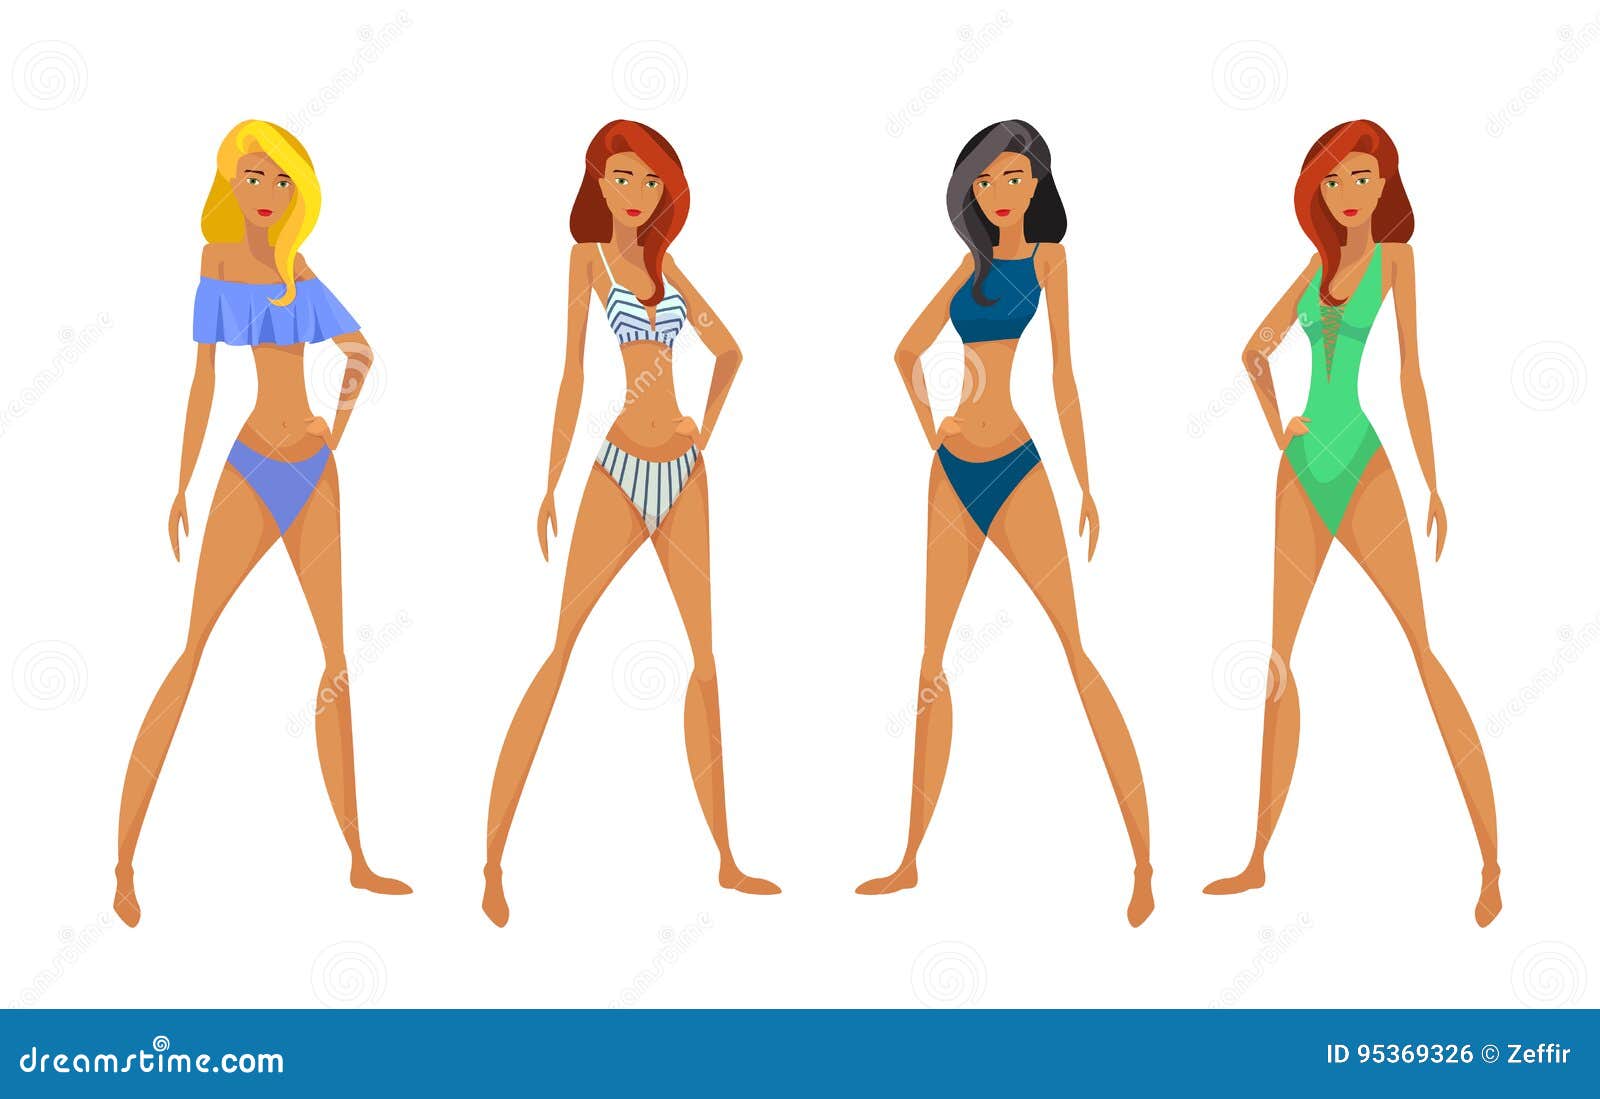 Fashionable swimsuits various types women Vector Image